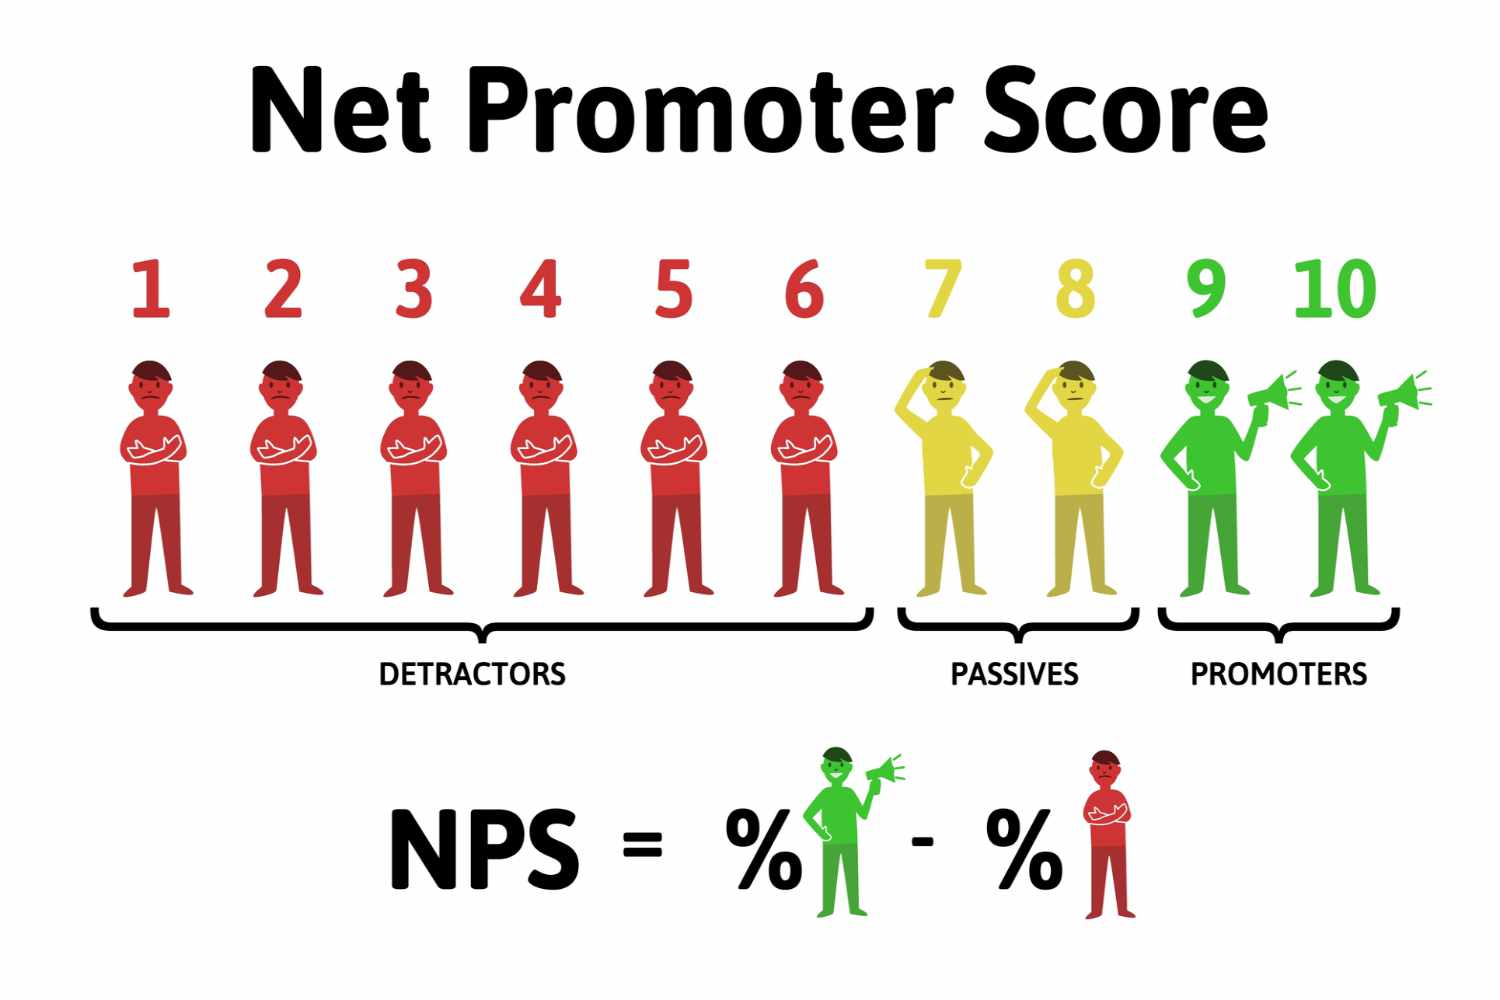 How to get value from Net Promoter Score